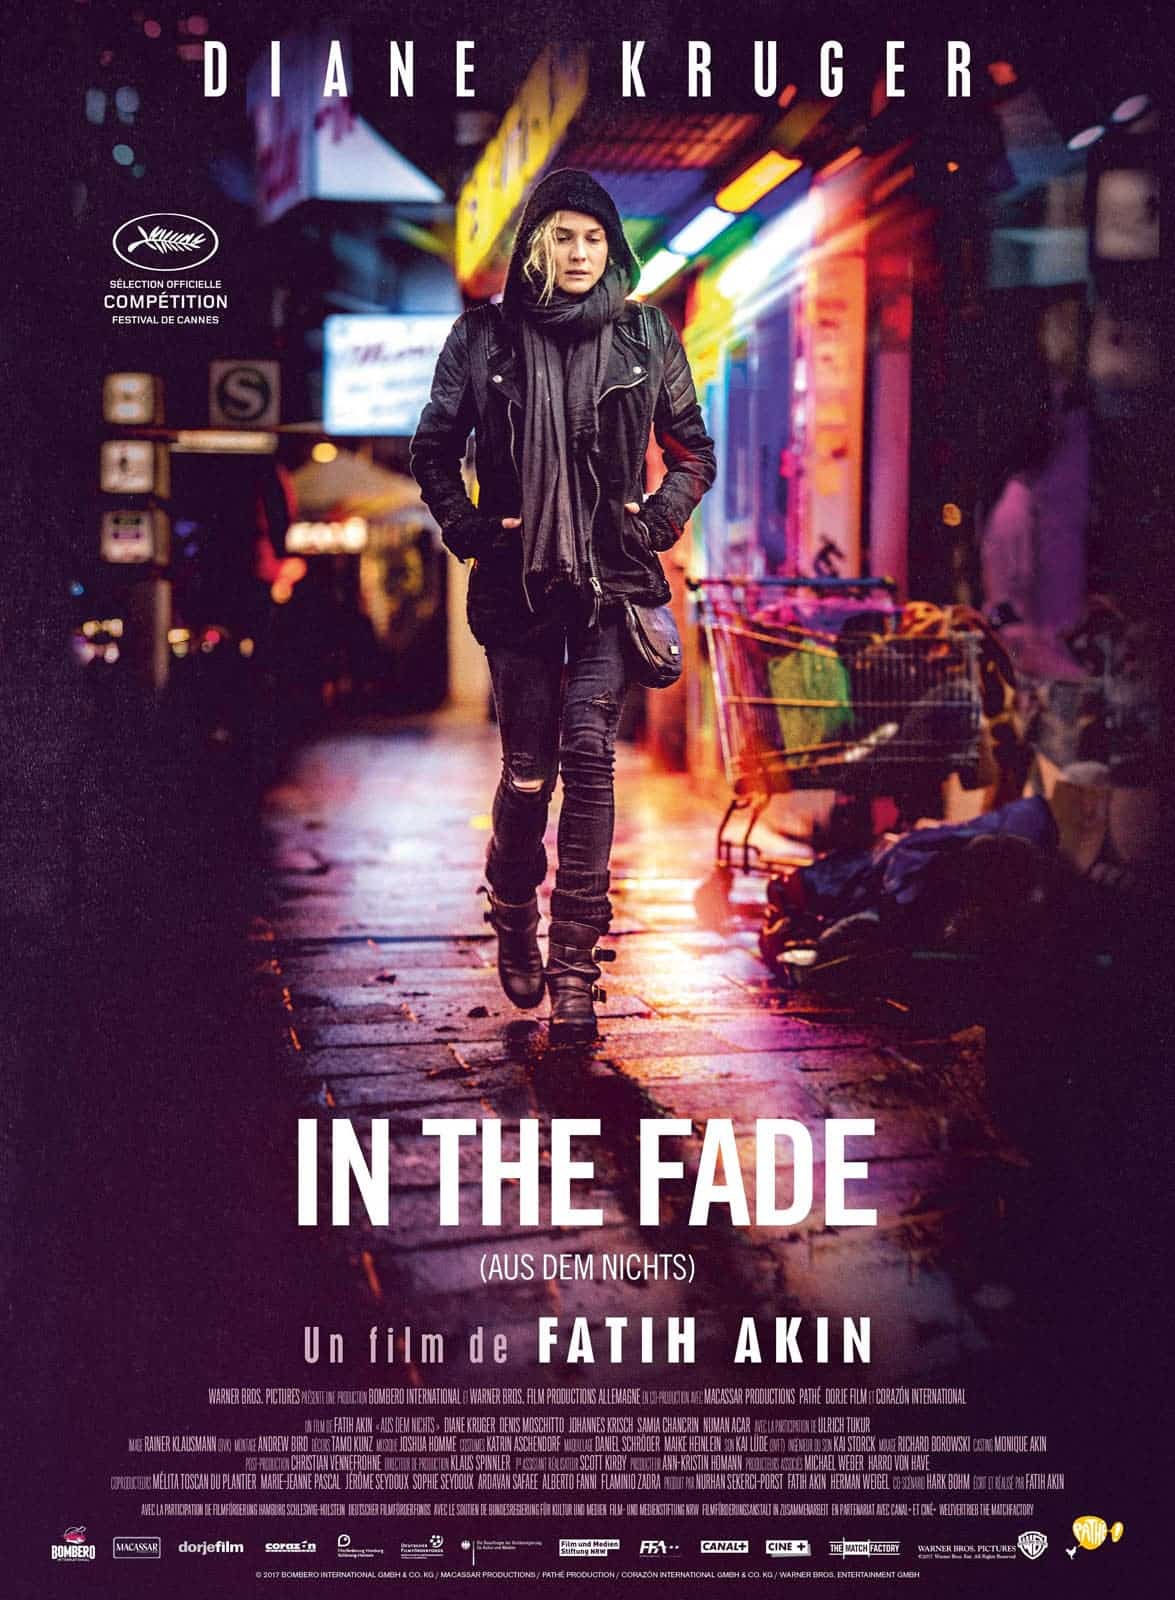 In the fade (Streaming, Synopsis, Casting, Bande annonce)